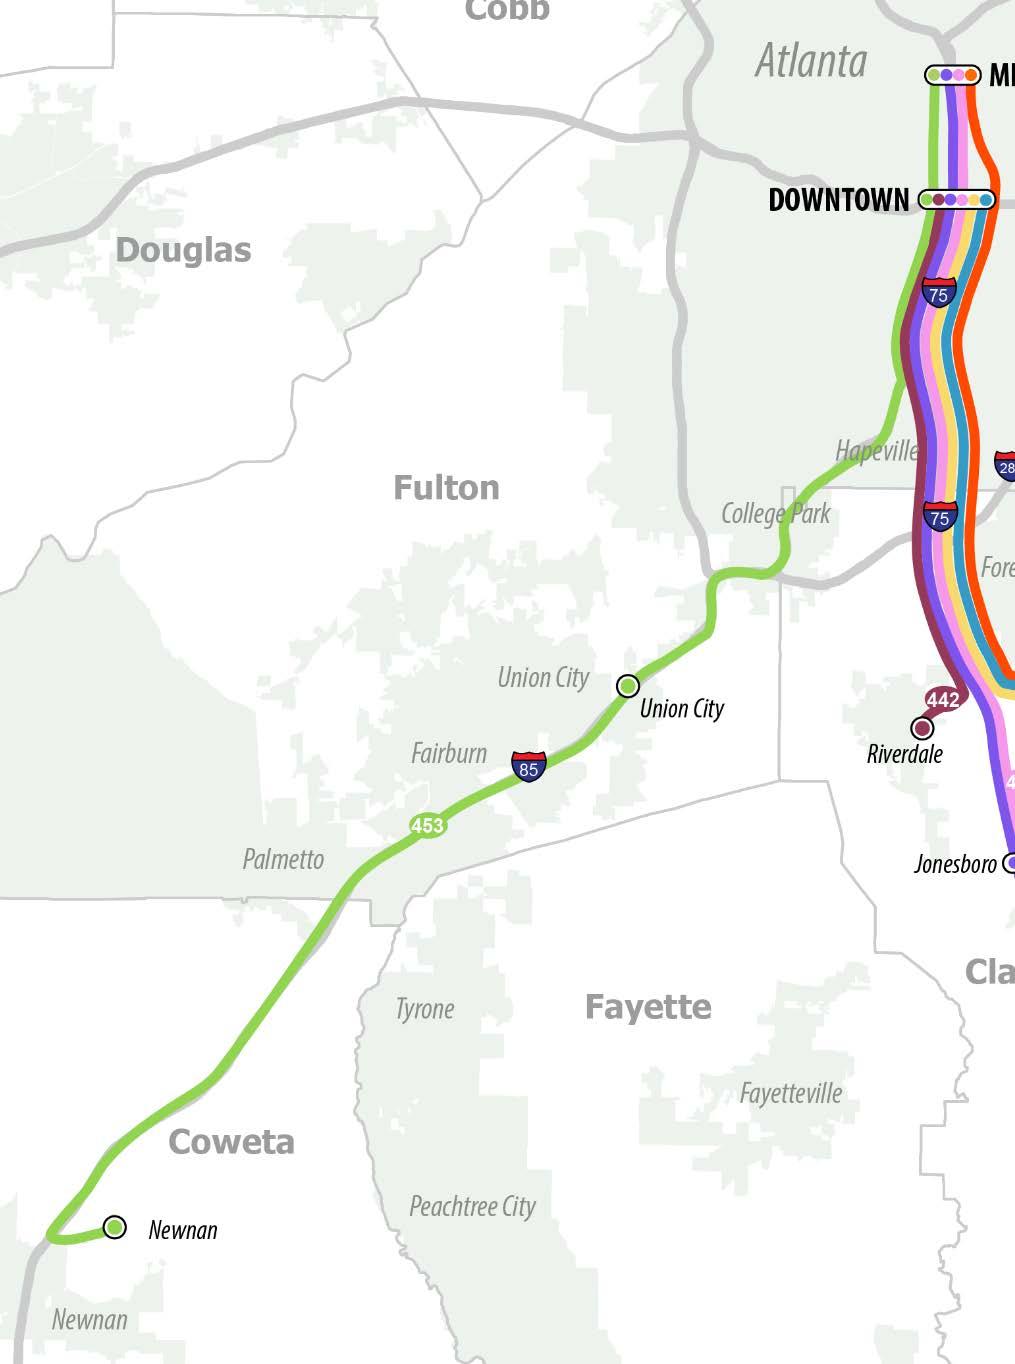 Horizon 1 Service Changes I-85 South New 453 Consolidates service between Newnan/Union